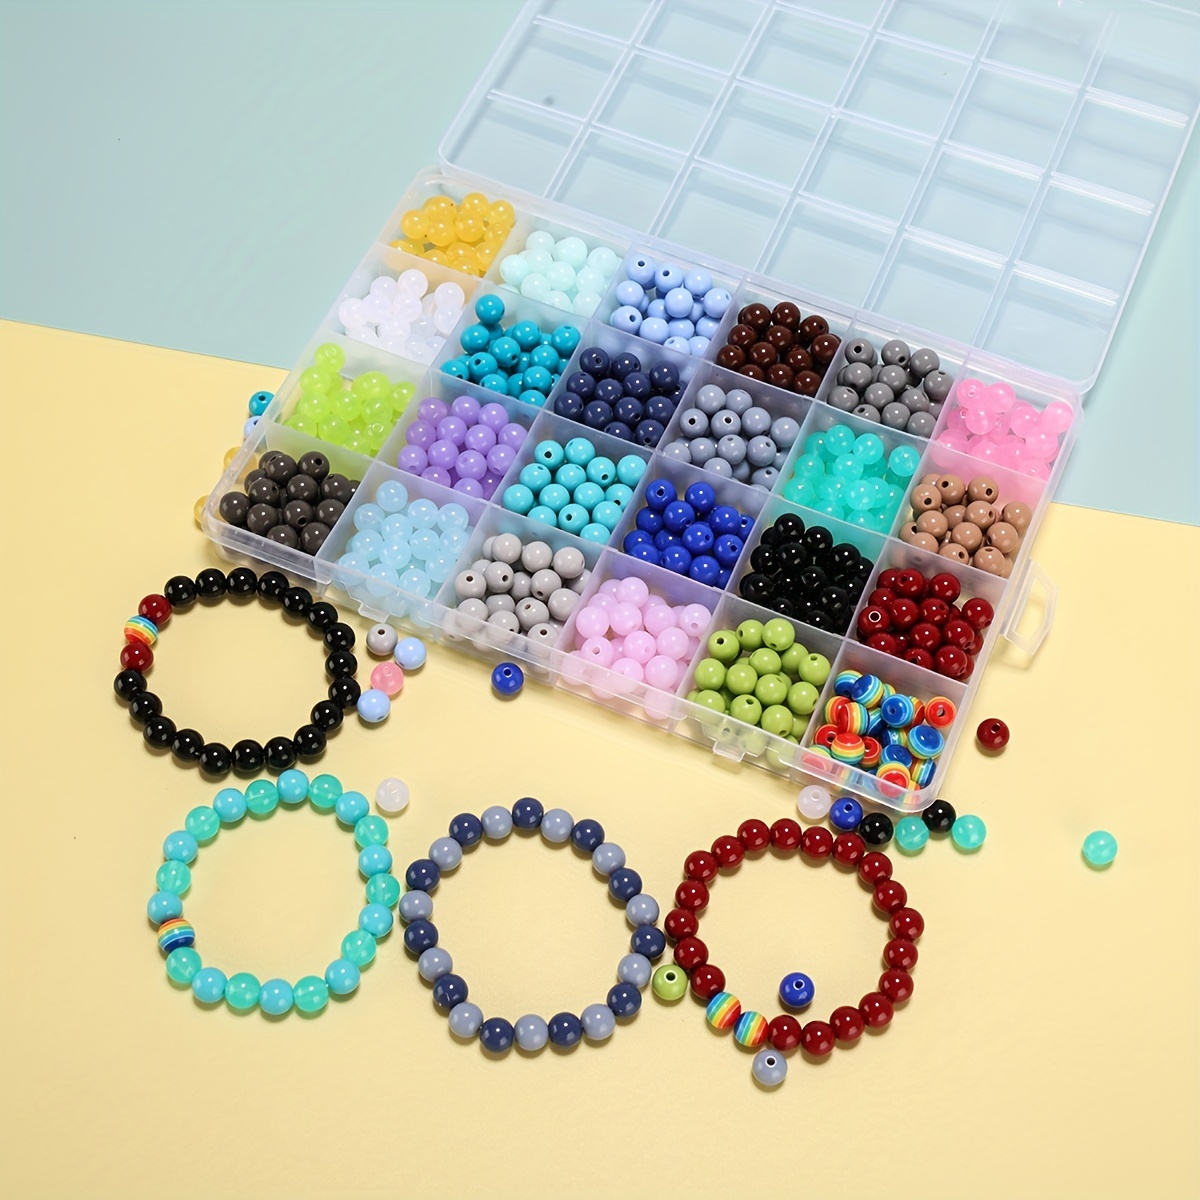  tchrules 463pcs Crystal Beads Kit for Jewelry Making